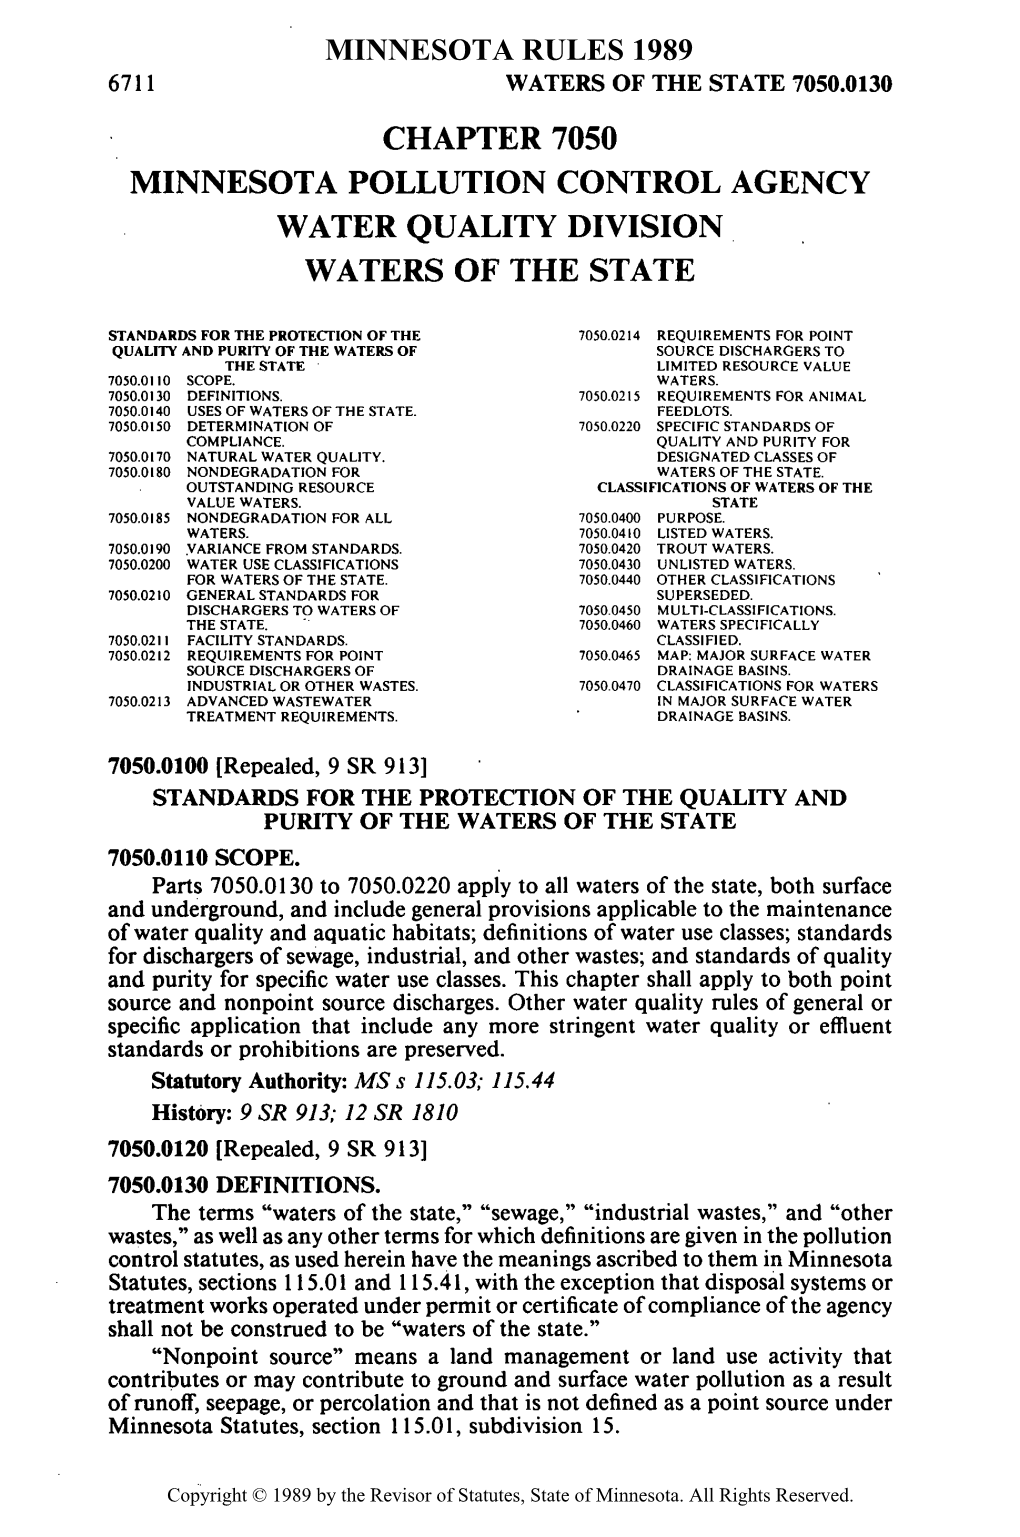 Chapter 7050 Minnesota Pollution Control Agency Water Quality Division Waters of the State